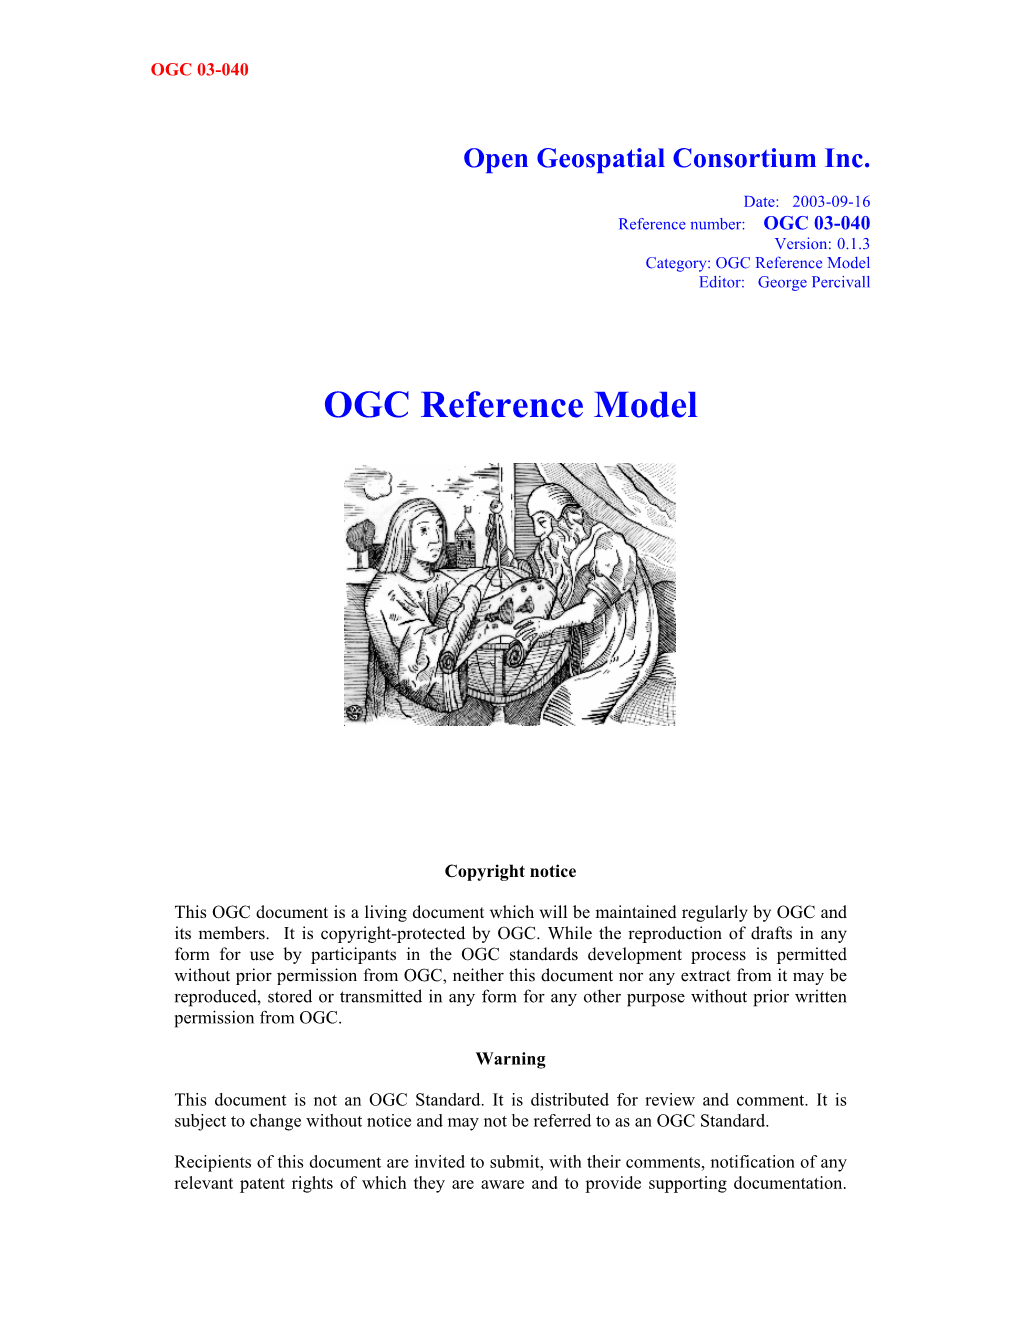 OGC Reference Model Editor: George Percivall